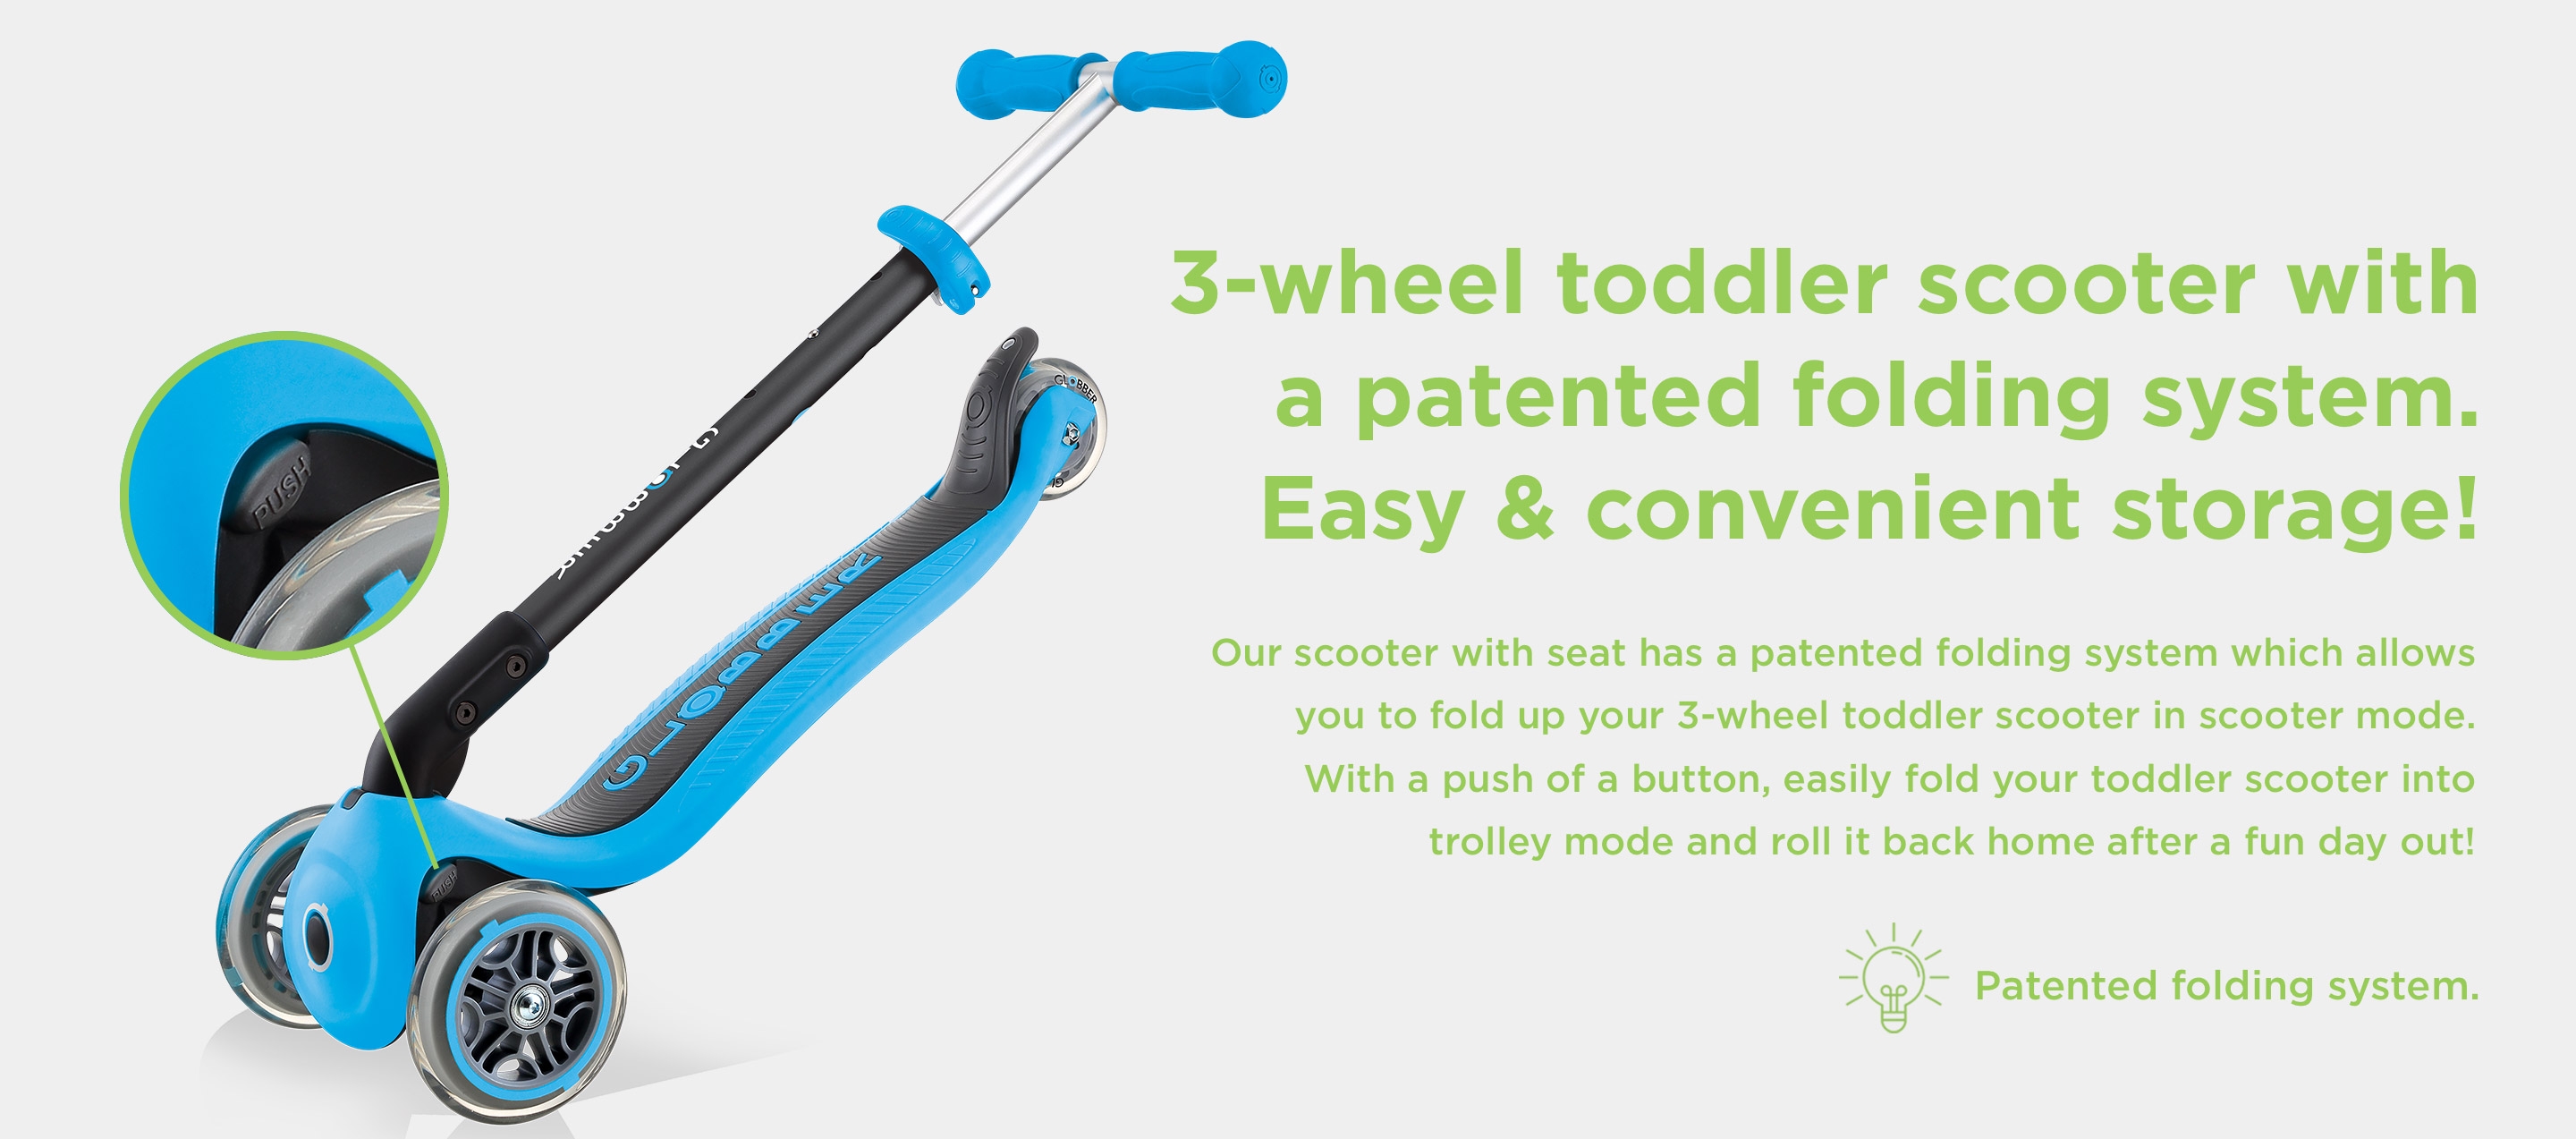 GO UO FOLDABLE PLUS is the best 3 in 1 scooter equipped with a patented folding system for easy storage